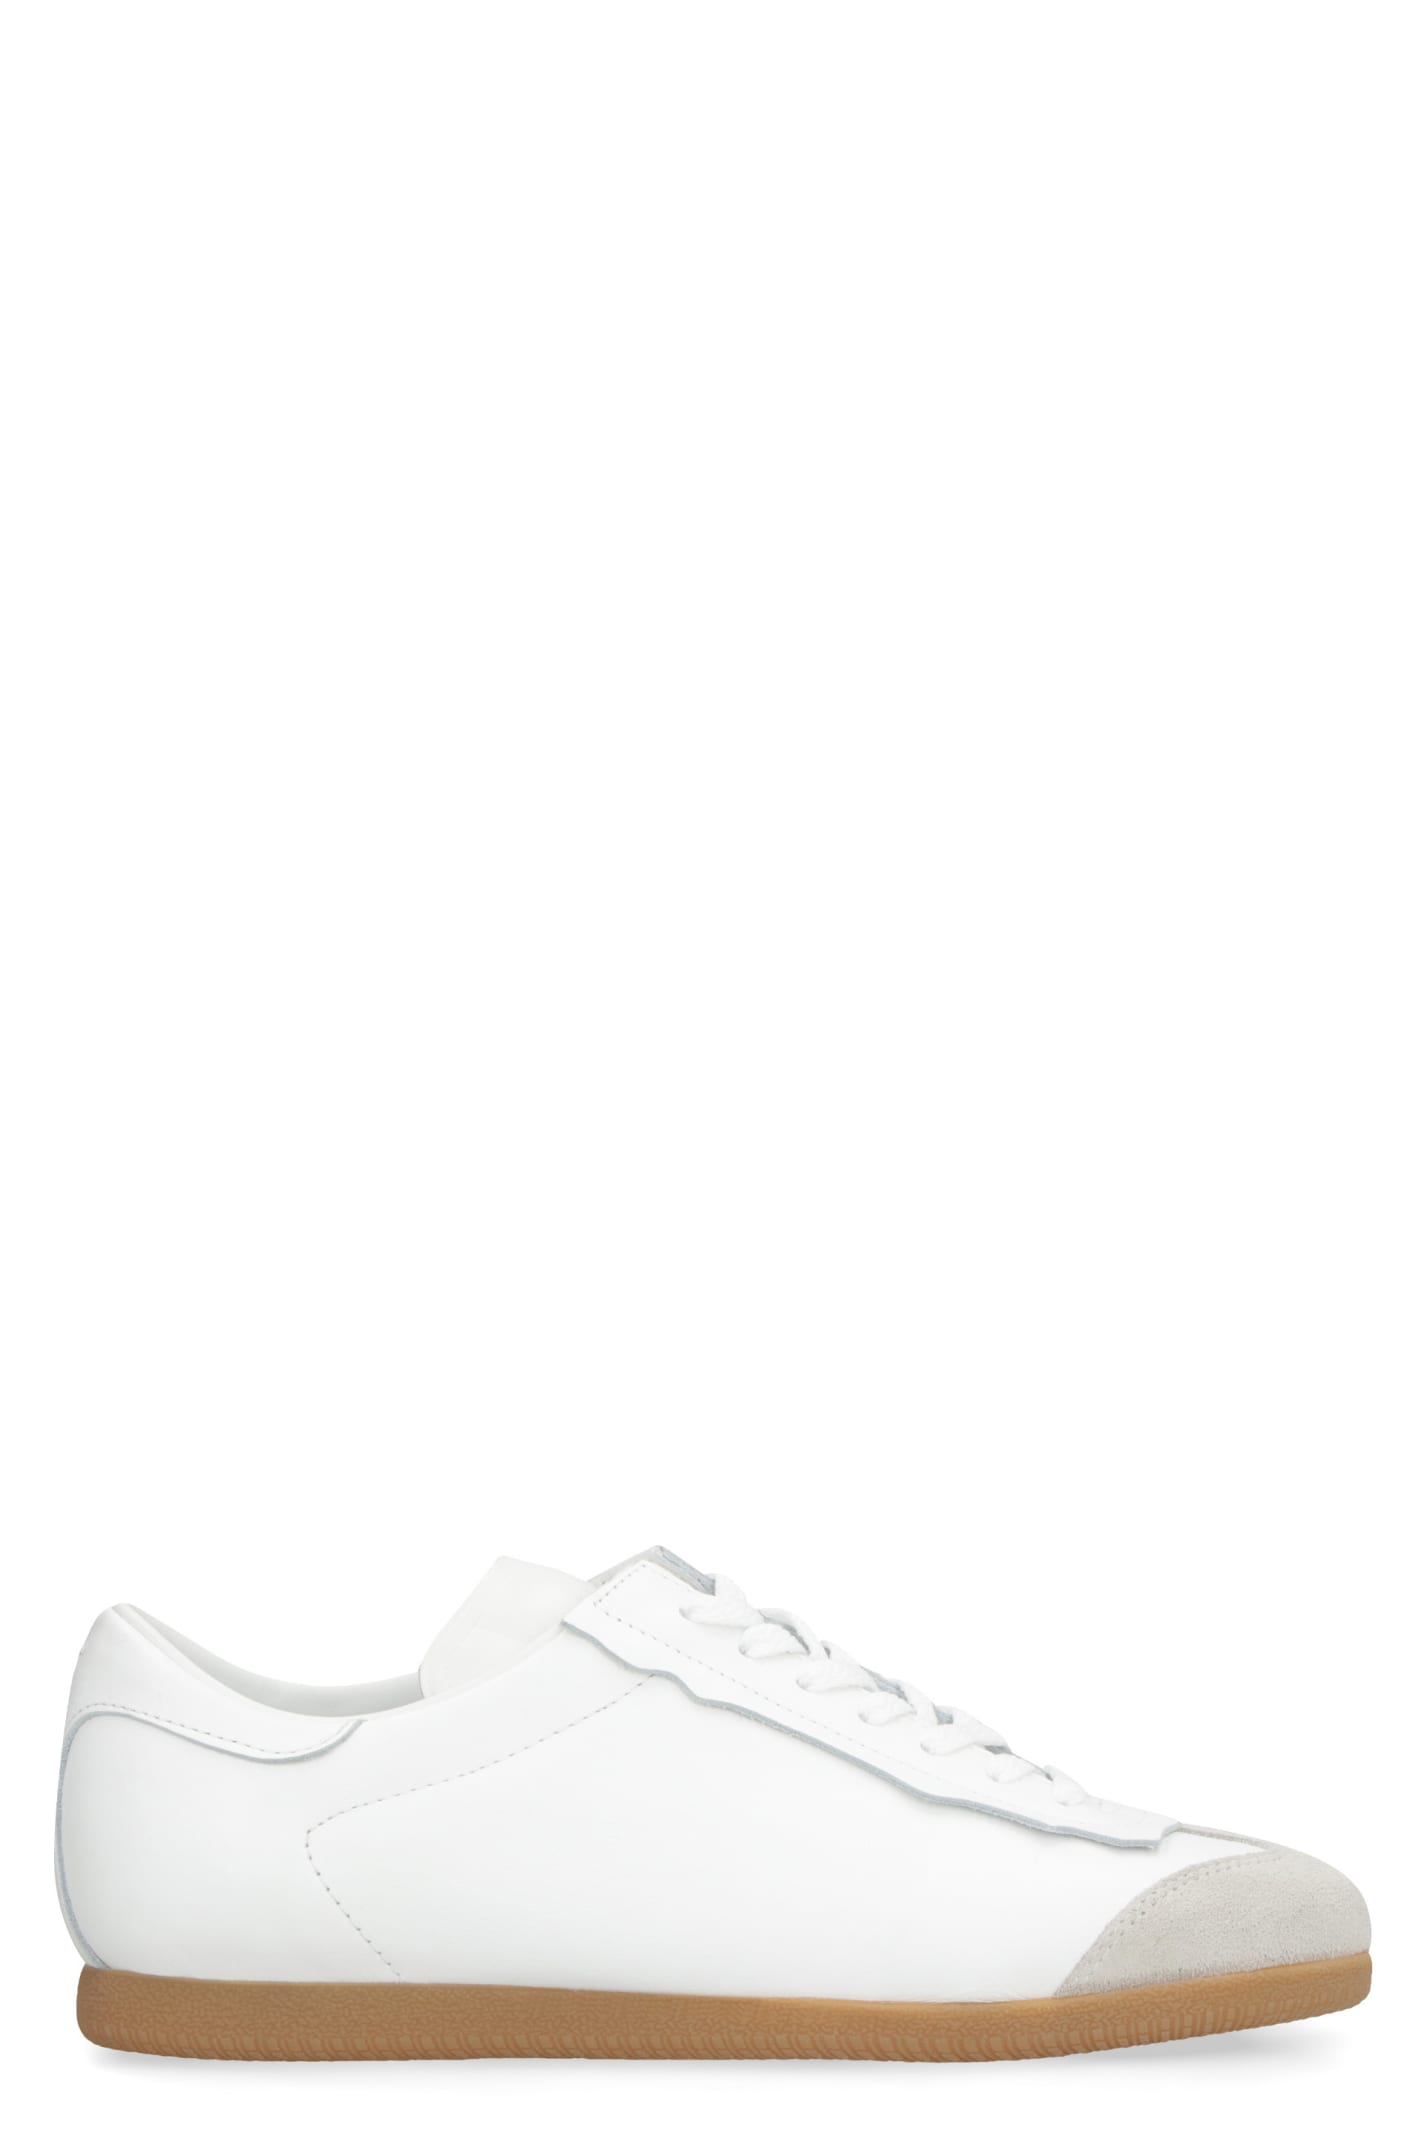 Maison Margiela Leather Low-top Sneakers In White